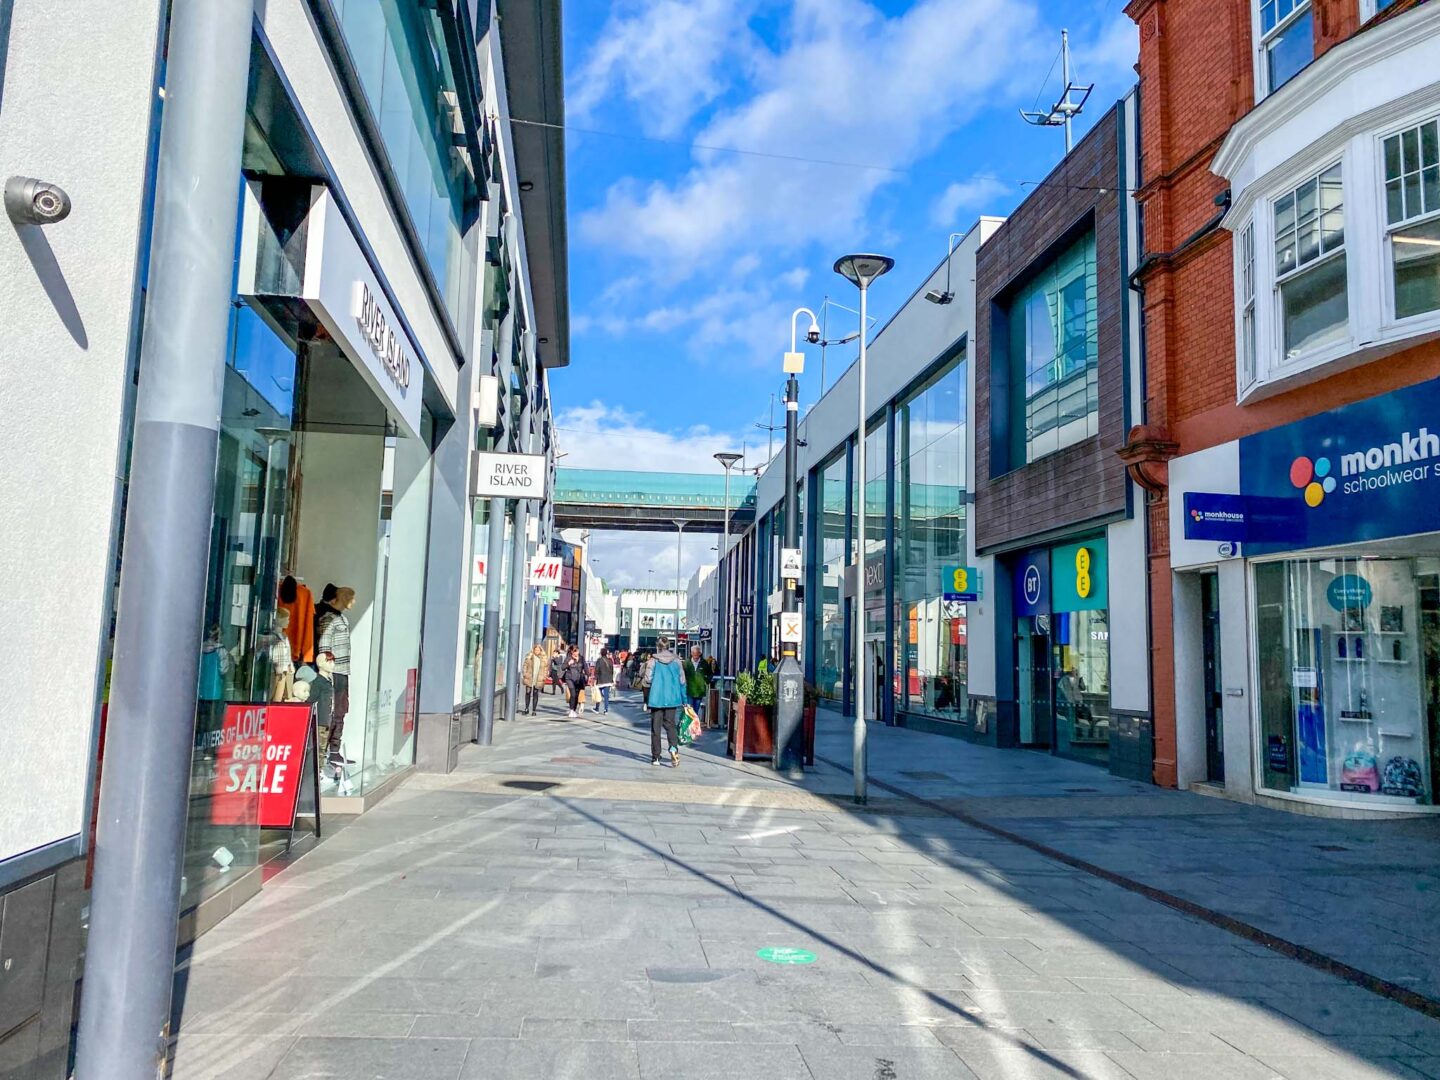 Things to do in Altrincham, Altrincham high street and shops